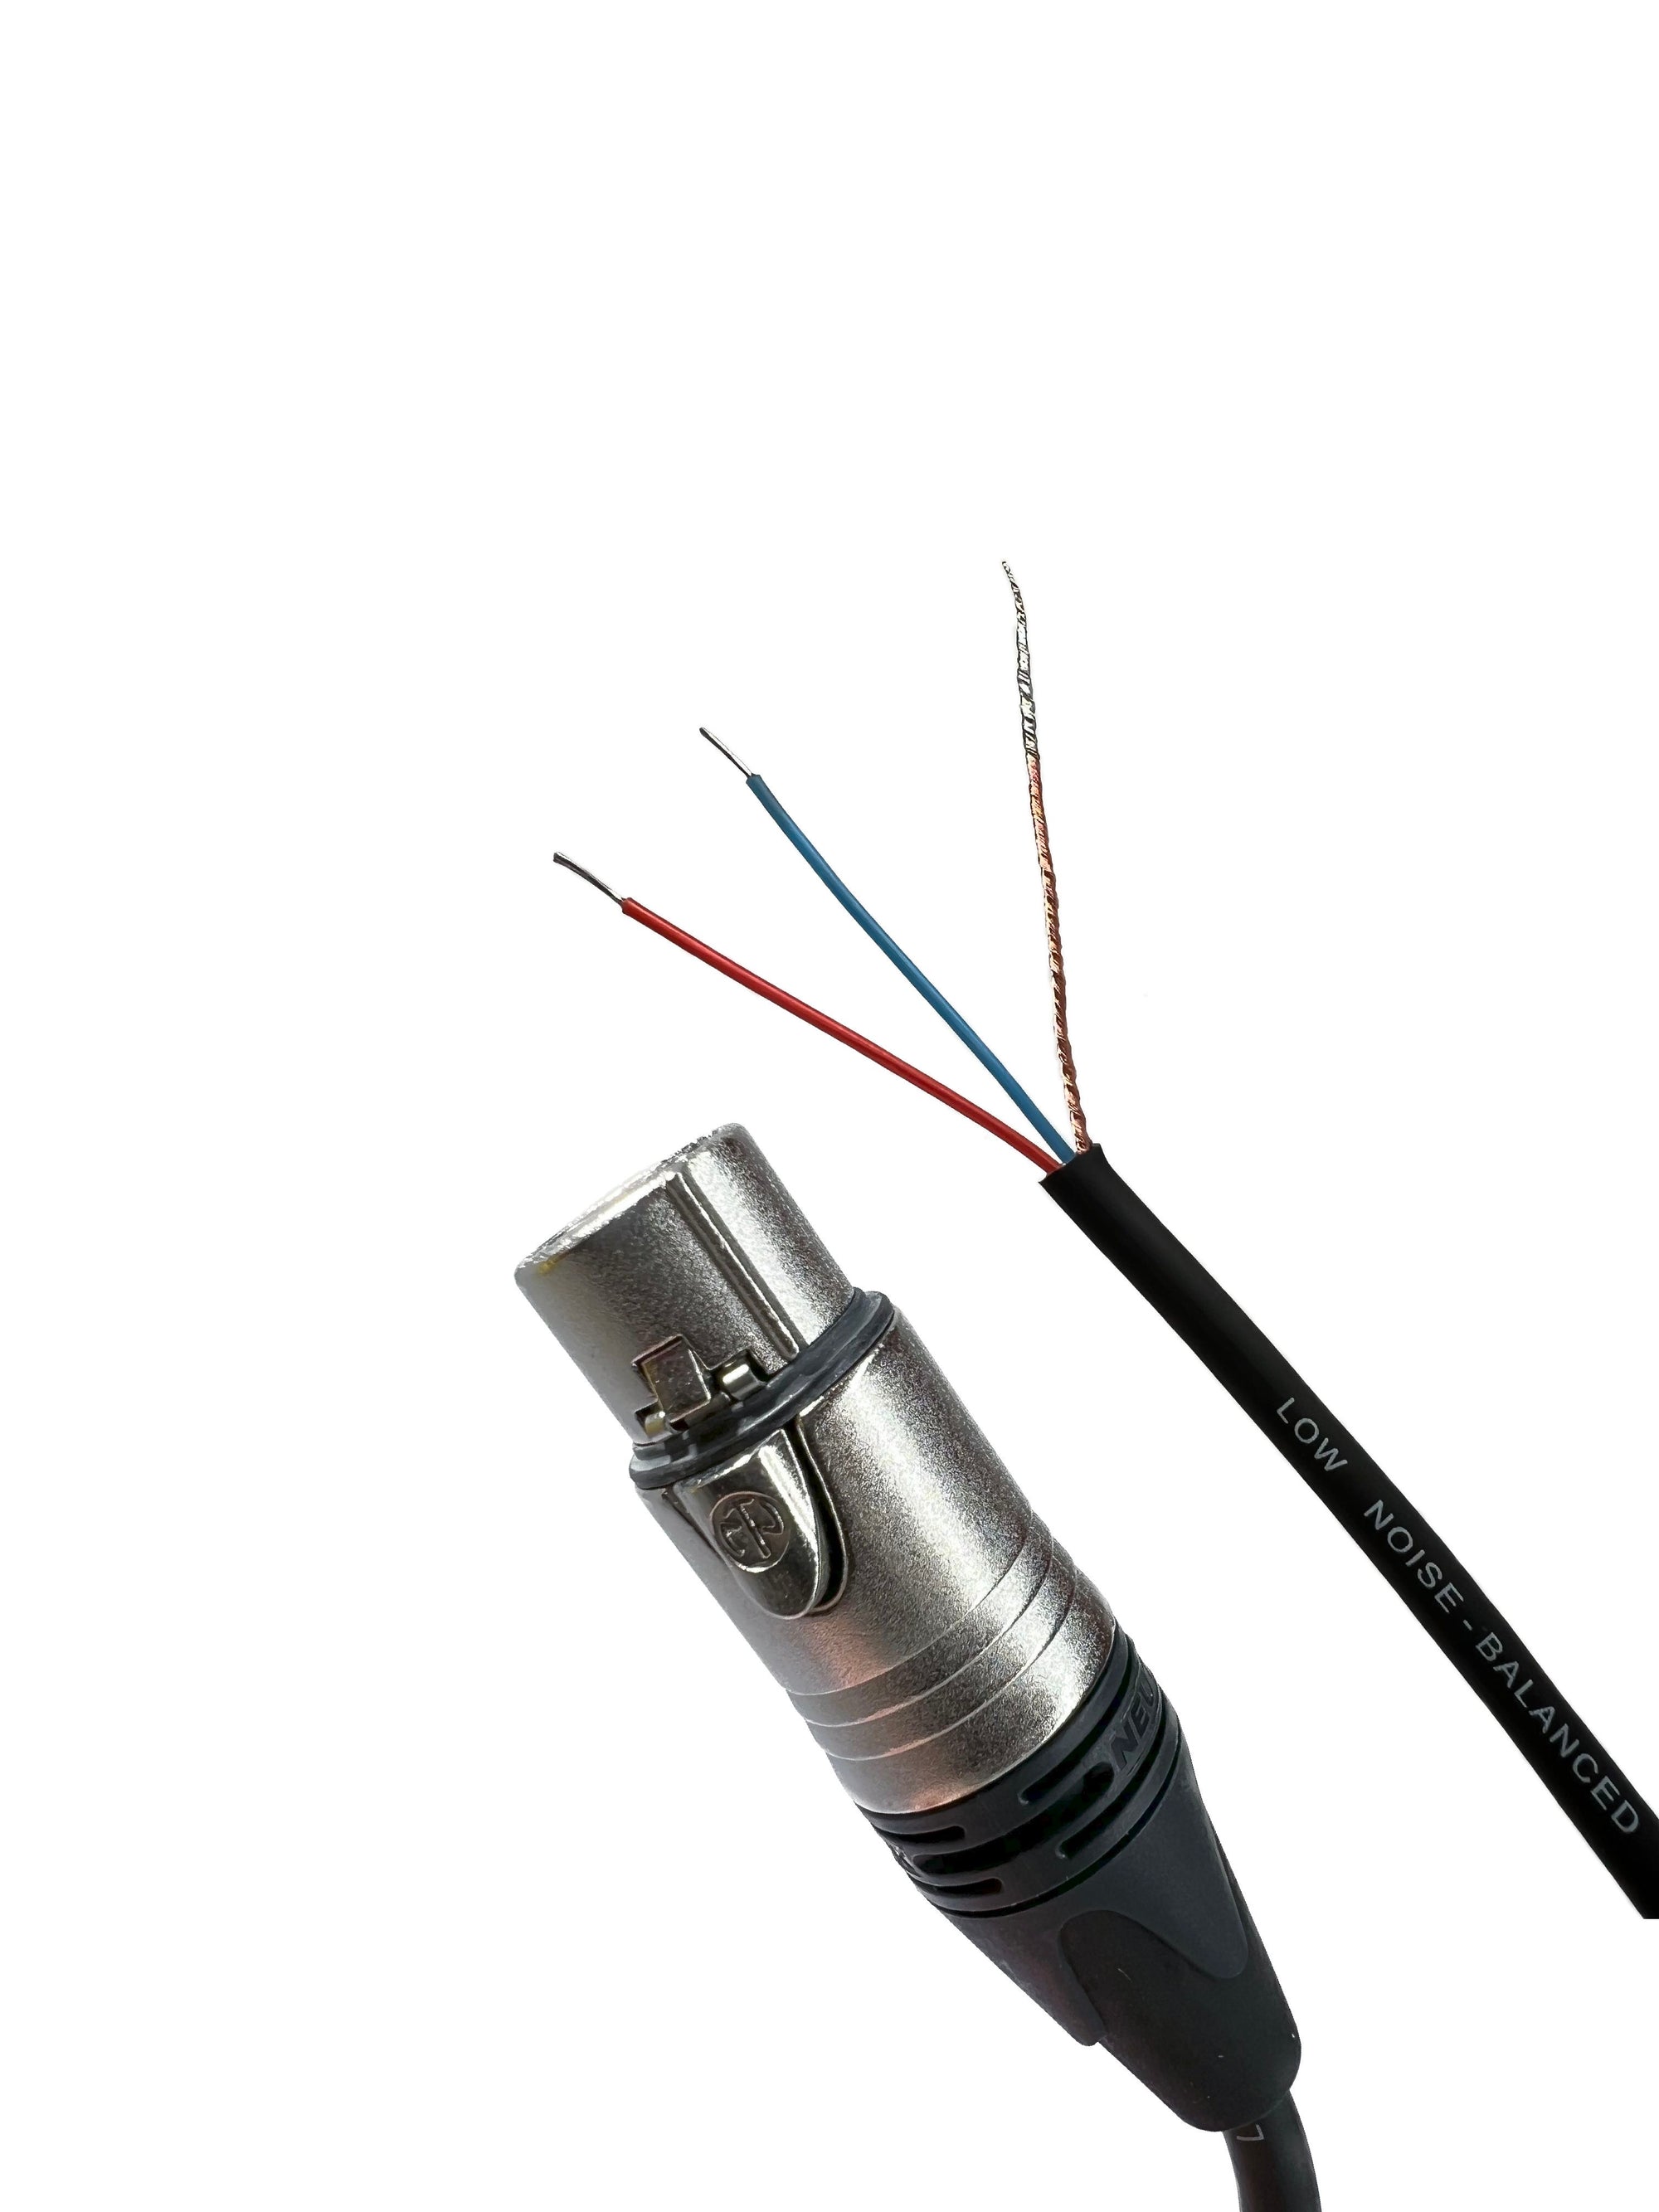 XLR 3 Pin Female to Blunt Install Cable